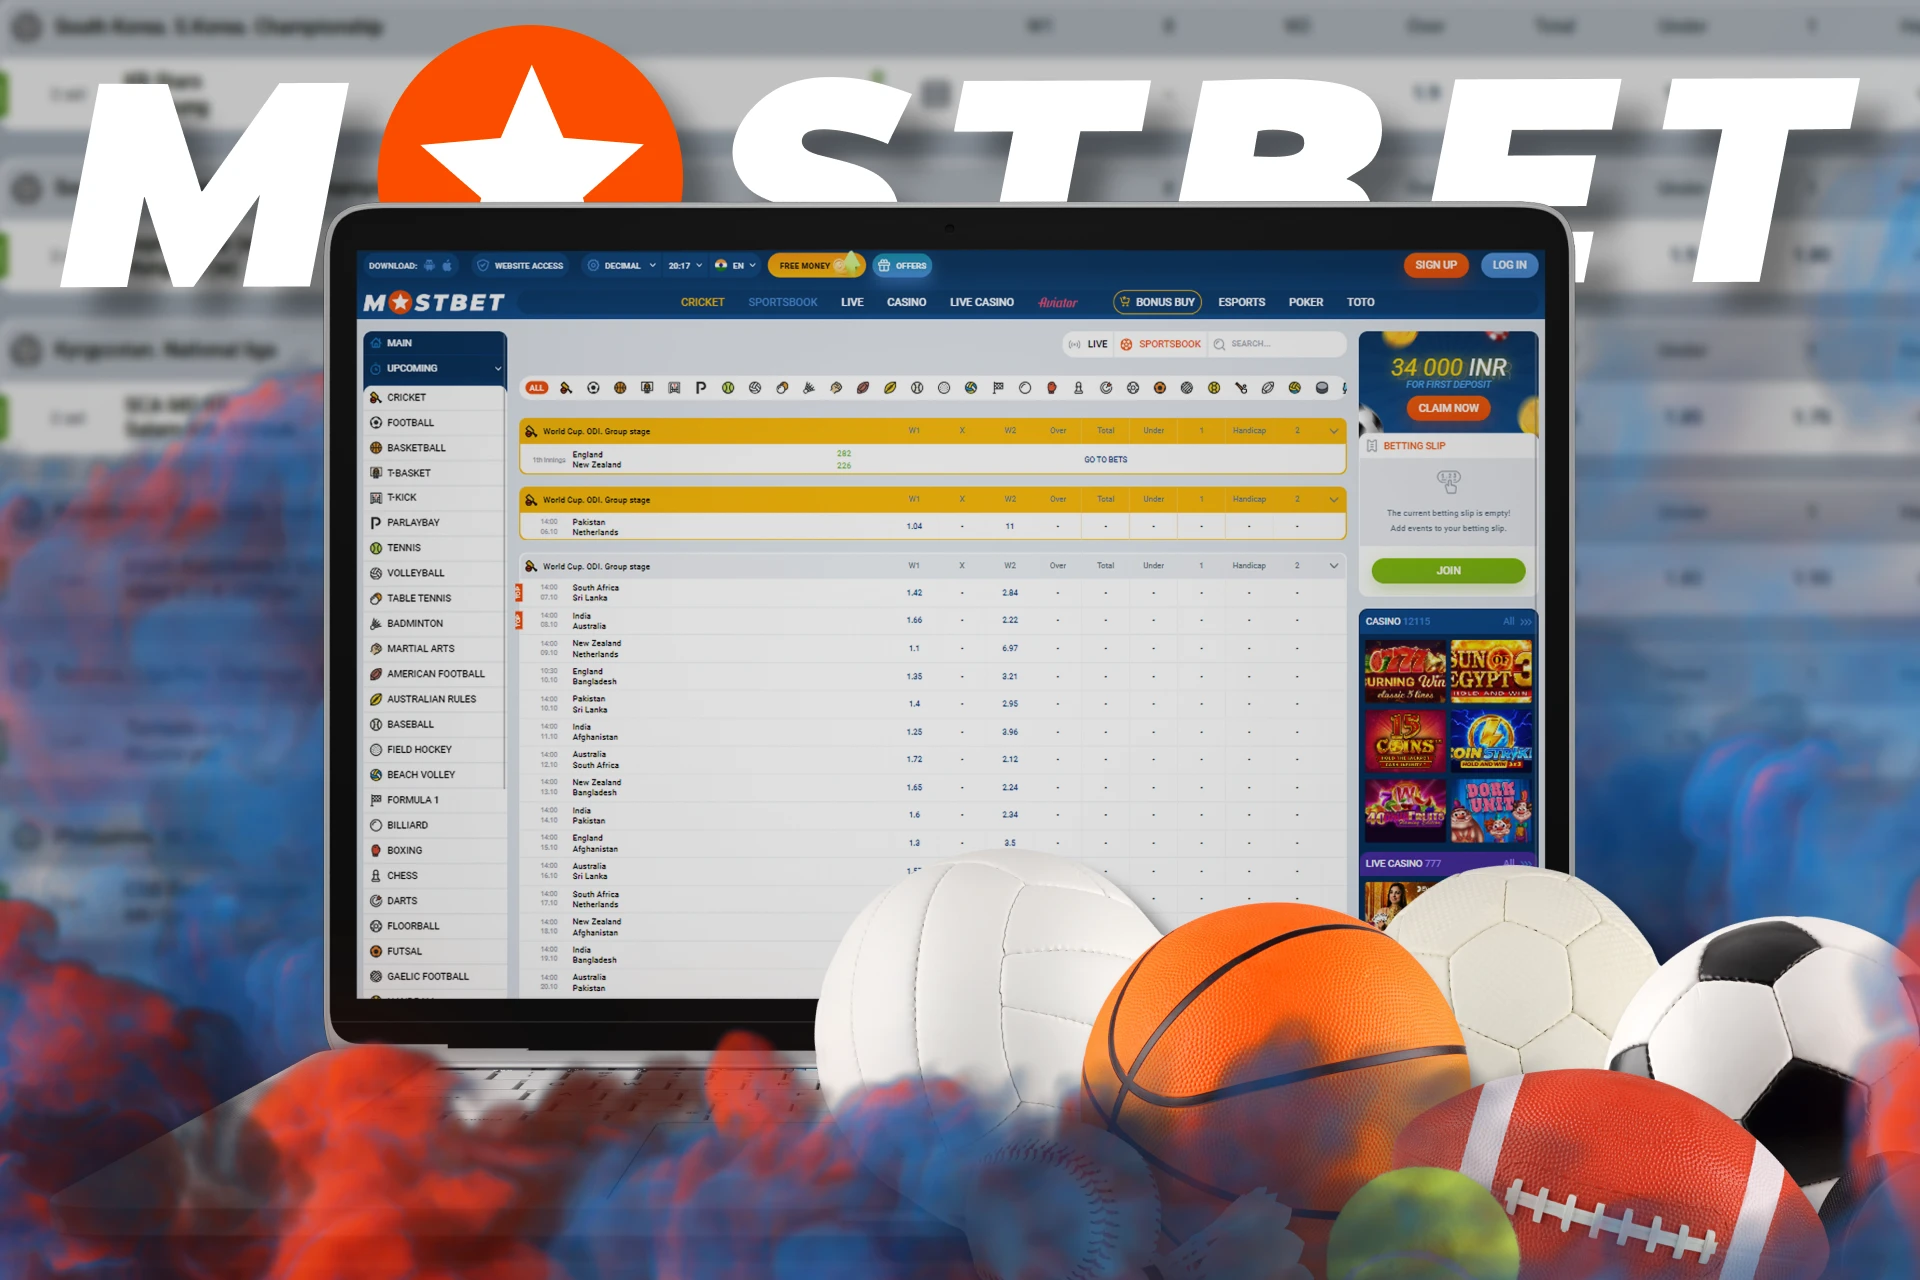 Bet on many different sports at Mostbet.